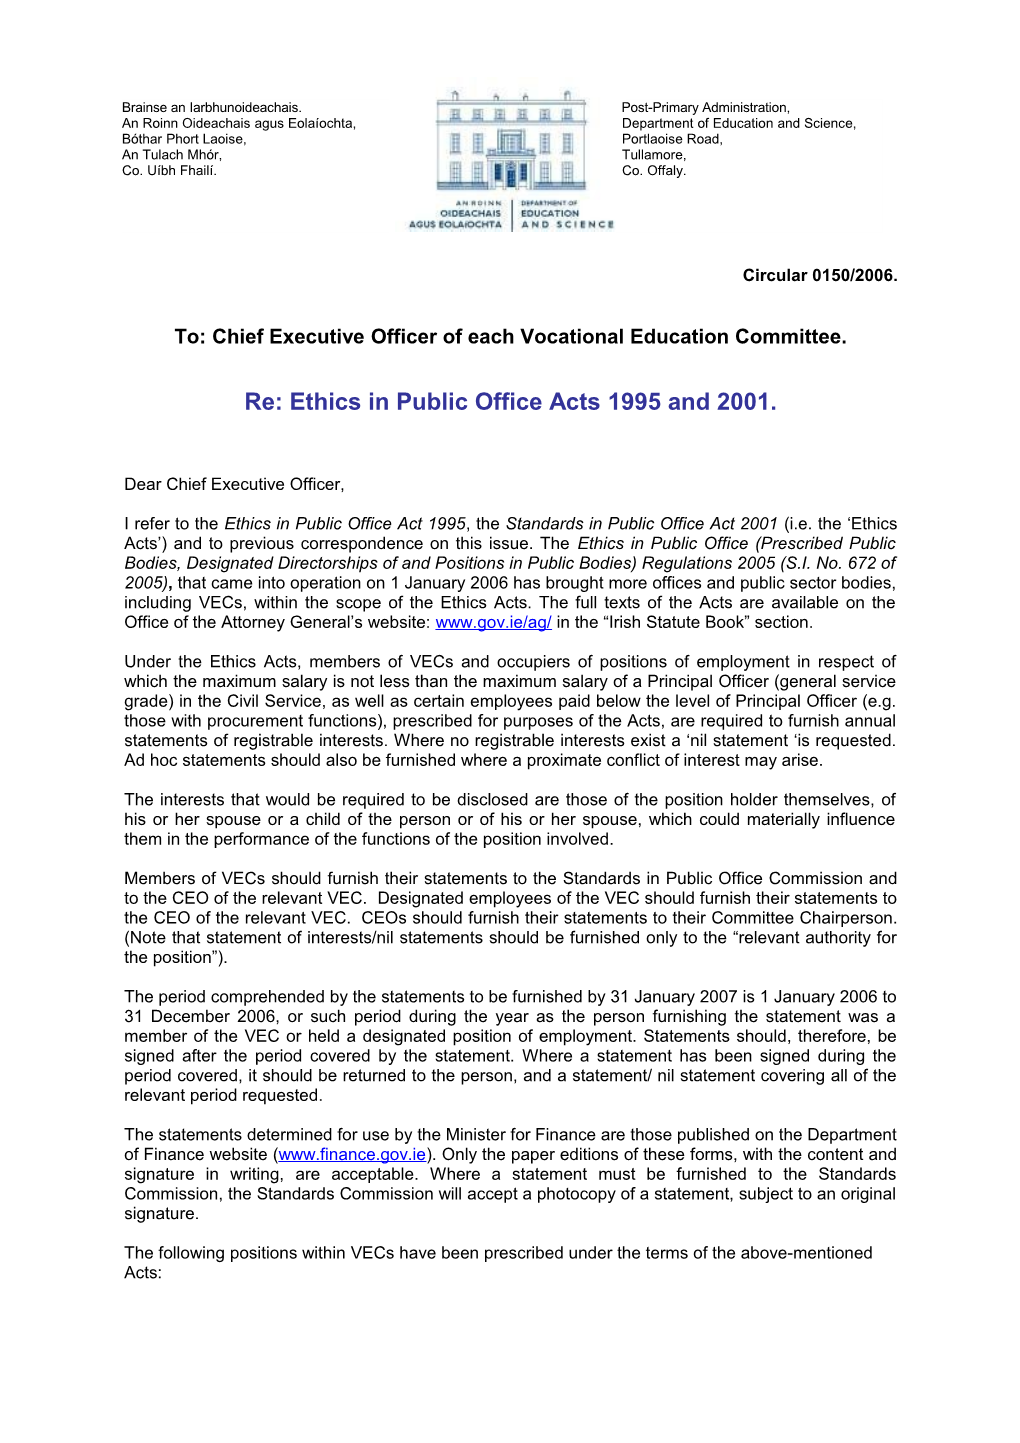 Circular 0150/2006 - Ethics in Public Office Acts 1995 and 2001 (File Format Word 150KB)